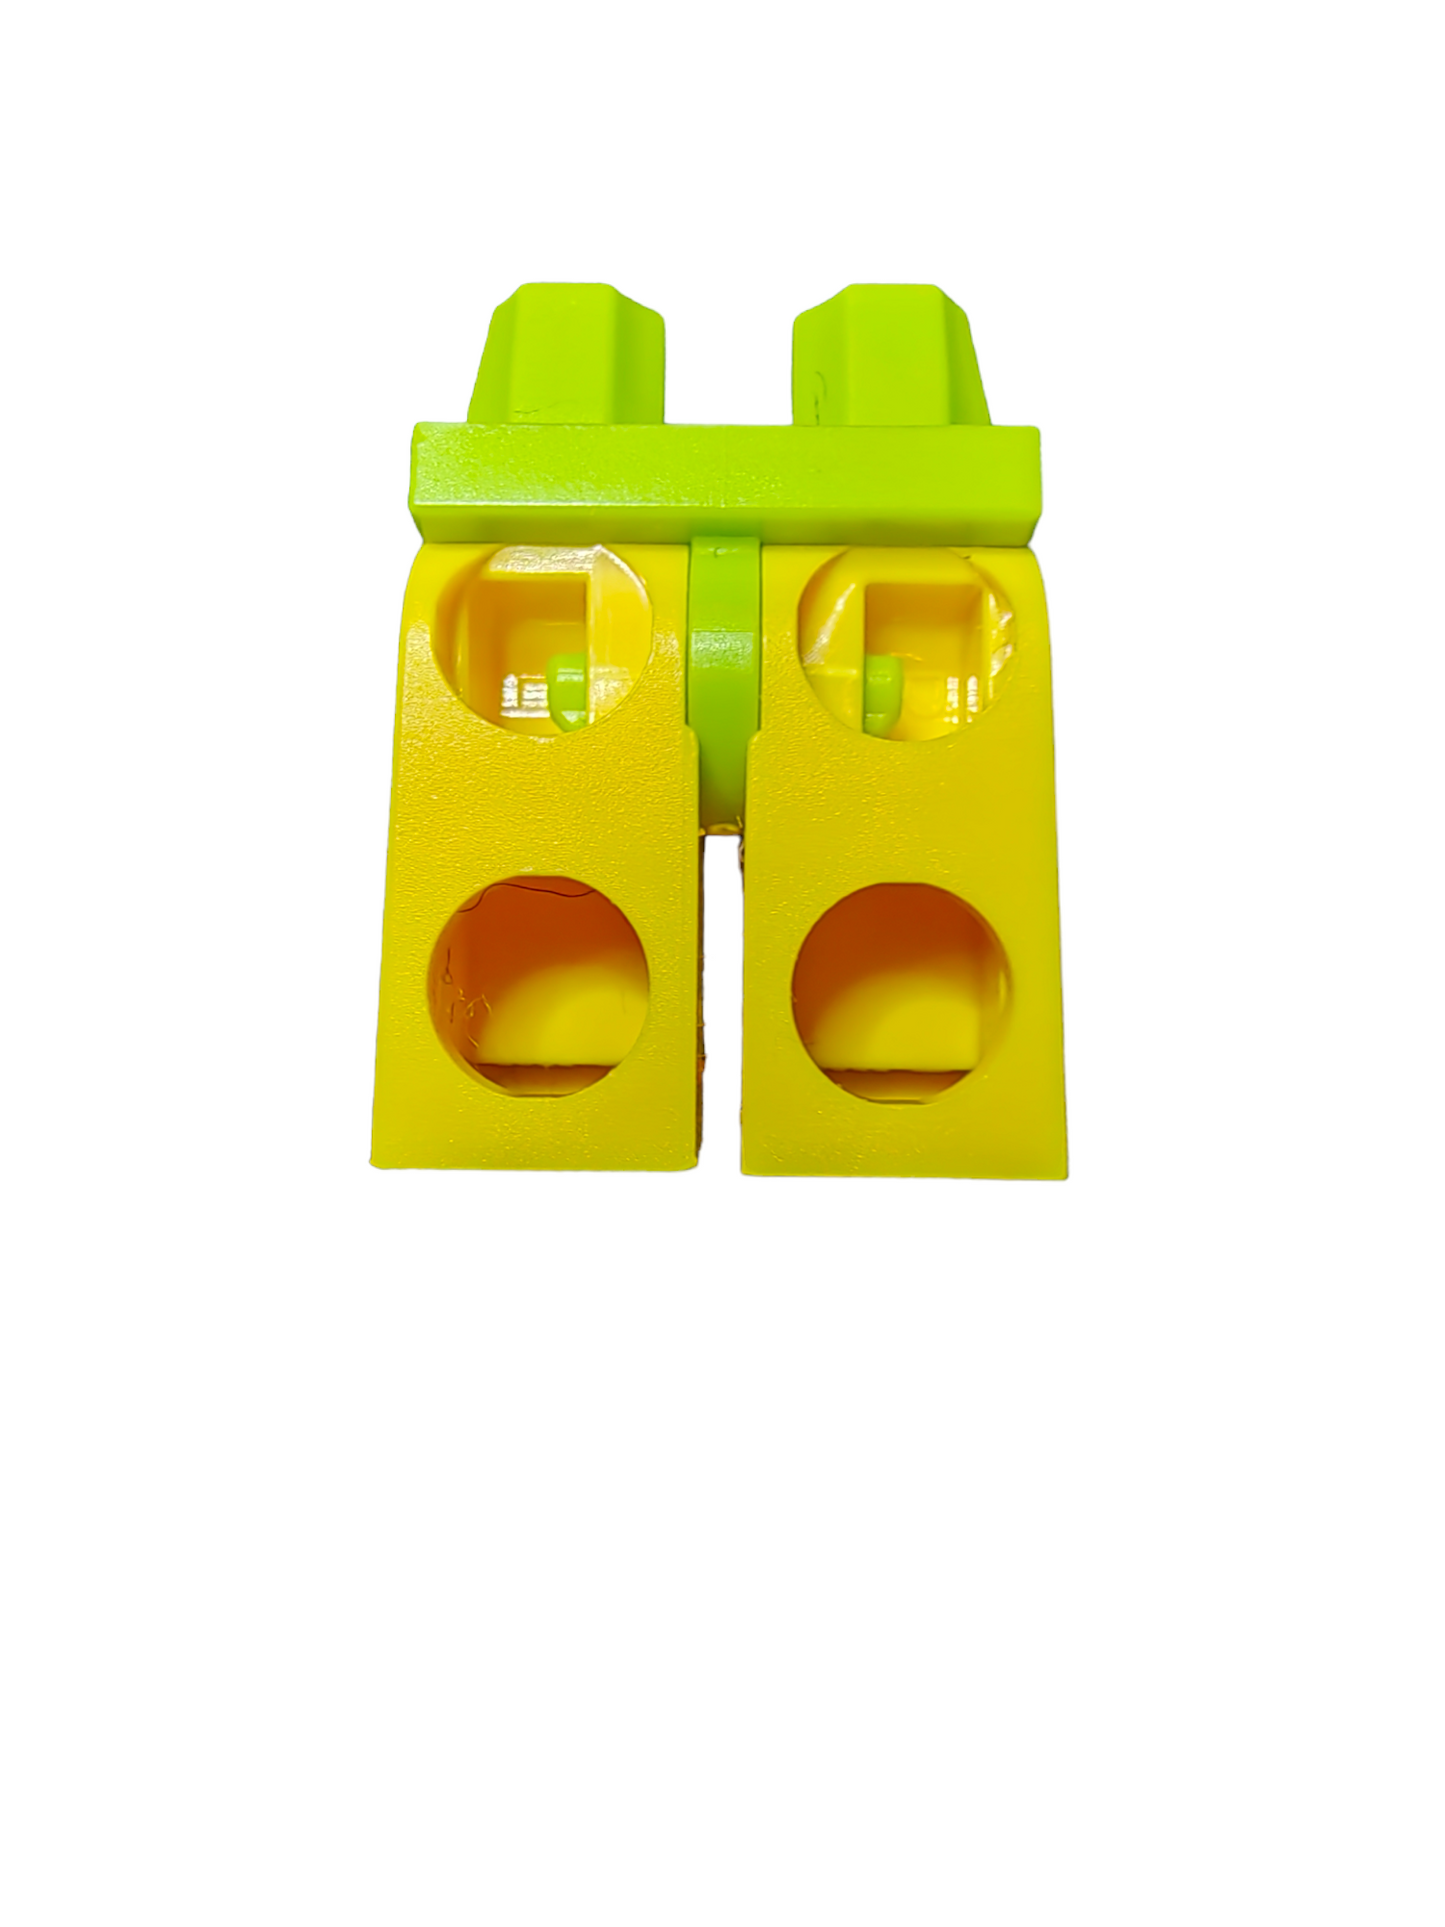 Minifigure Legs, Yellow with Green Swimming Trunks - UB1163